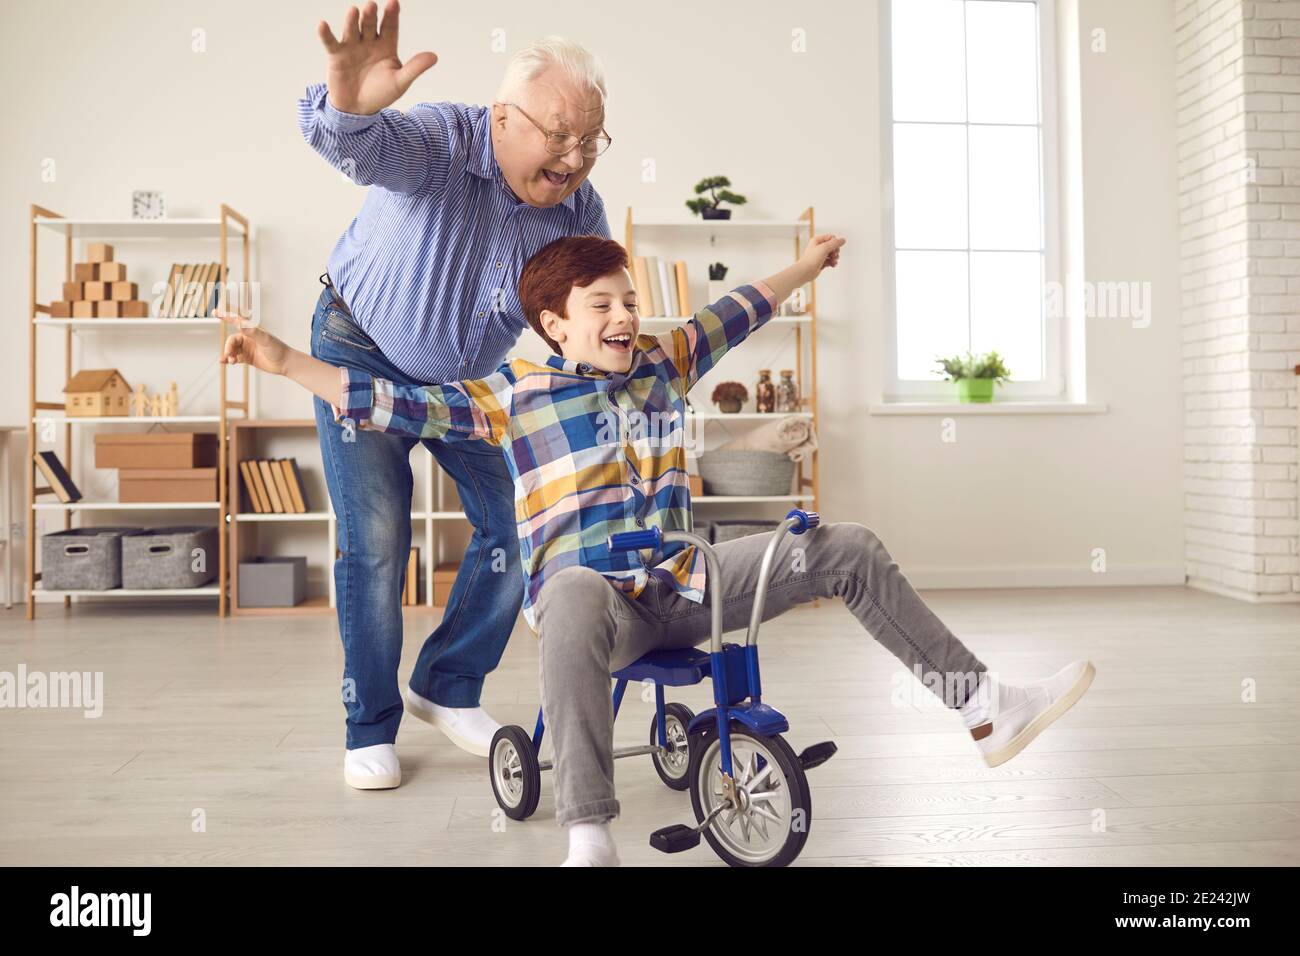 Happy energetic grandad and grandson playing childish games and having fun at home Stock Photo